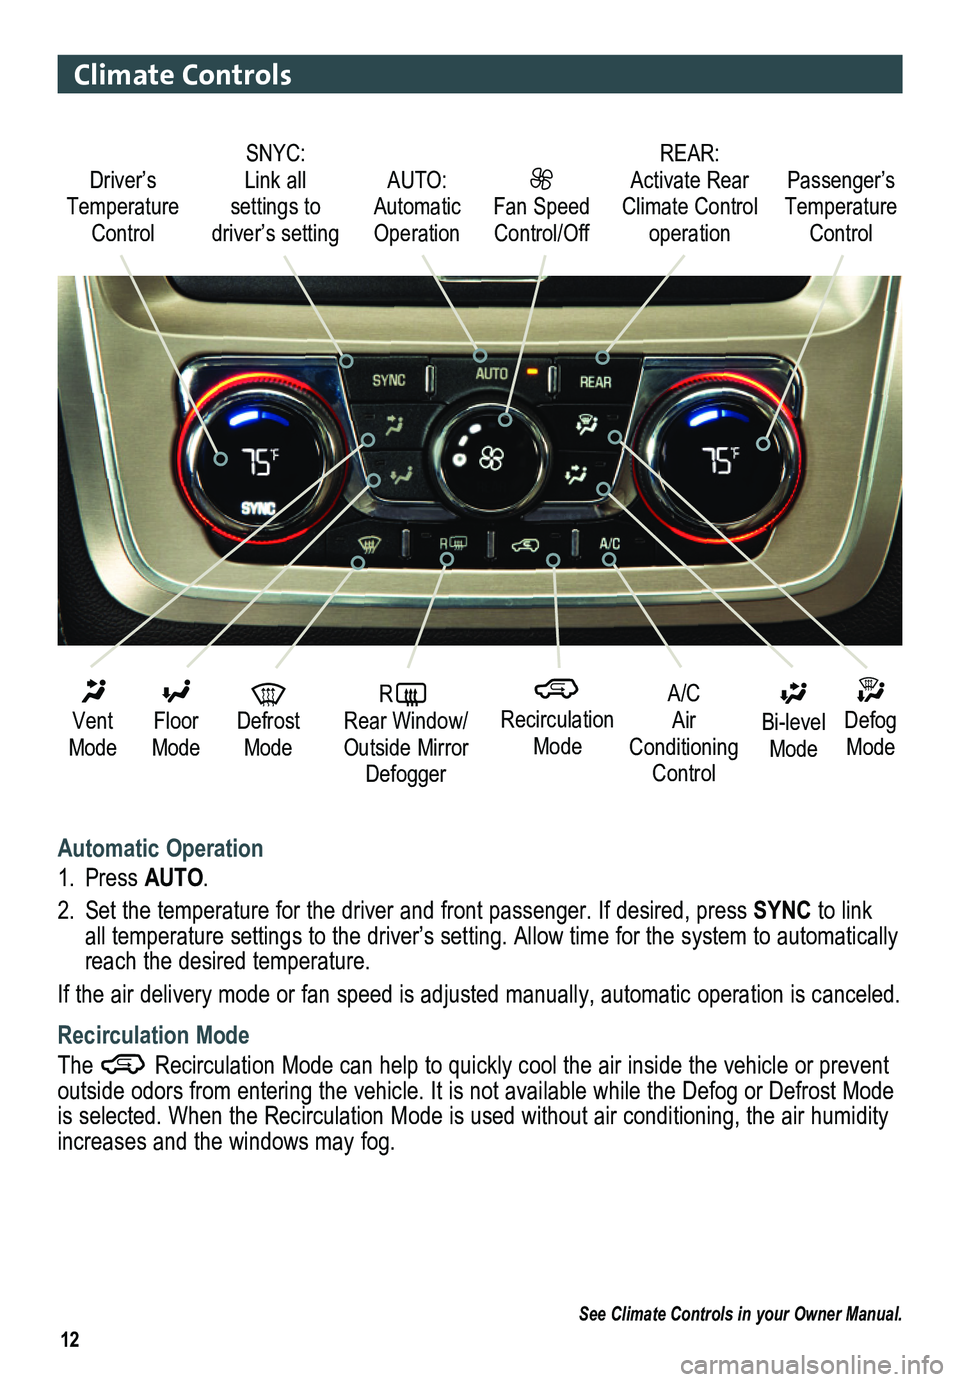 GMC ACADIA 2013  Get To Know Guide 12
Climate Controls
Automatic Operation
1. Press AUTO.
2. Set the temperature for the driver and front passenger. If desired, pres\
s SYNC to link all temperature settings to the driver’s setting. A